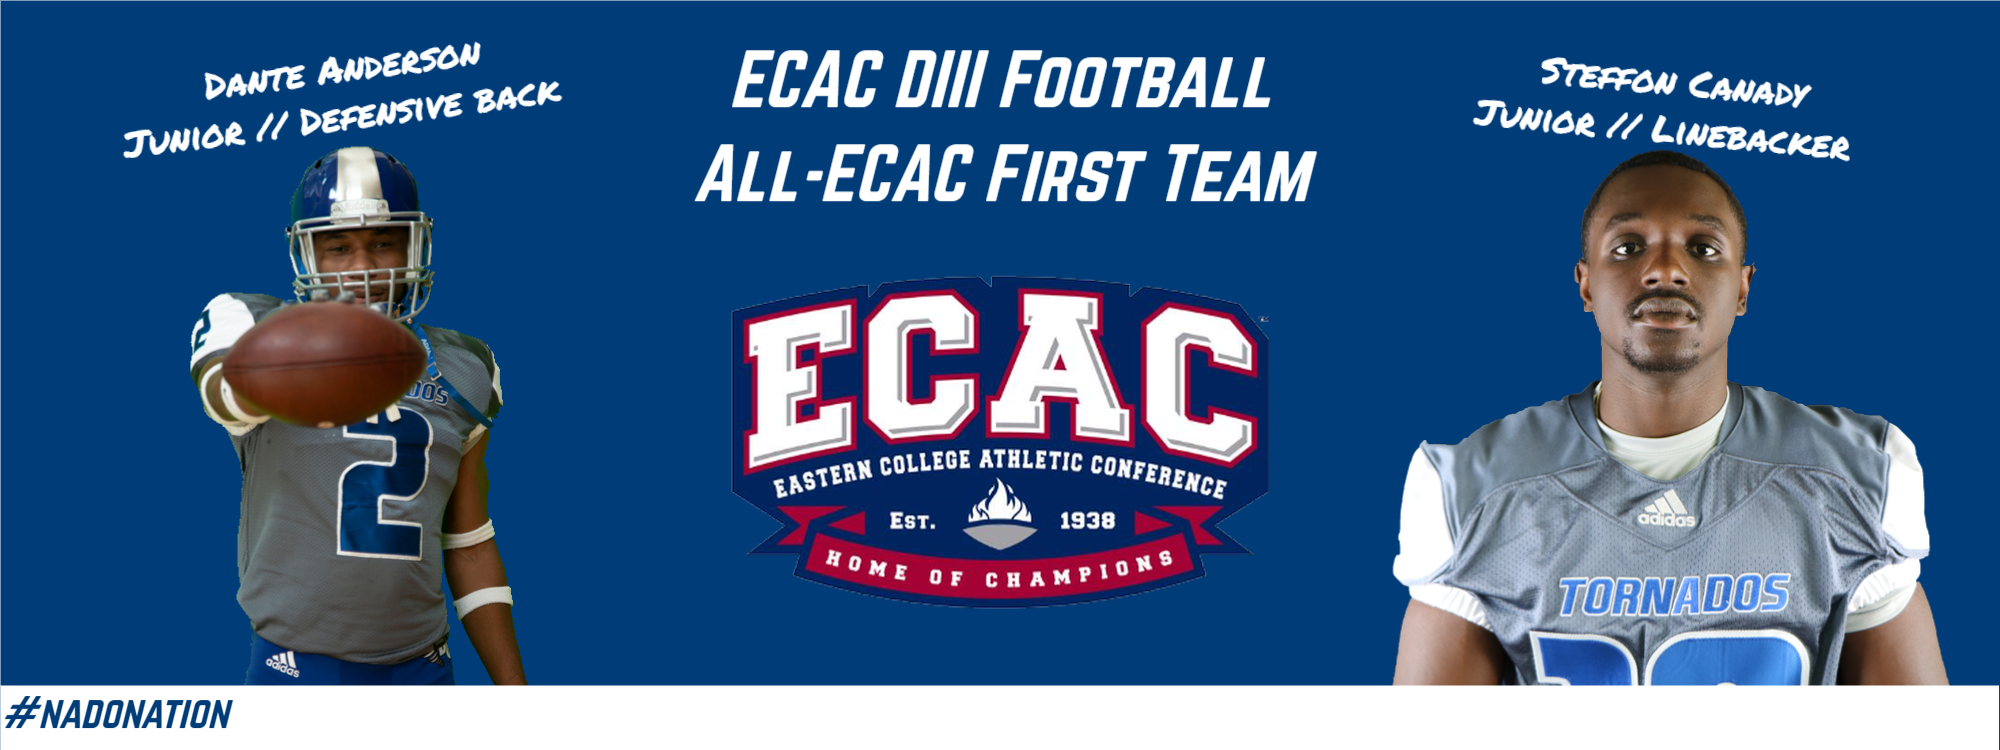 Anderson & Canady become the first-ever Brevard College student-athletes honored by the ECAC.